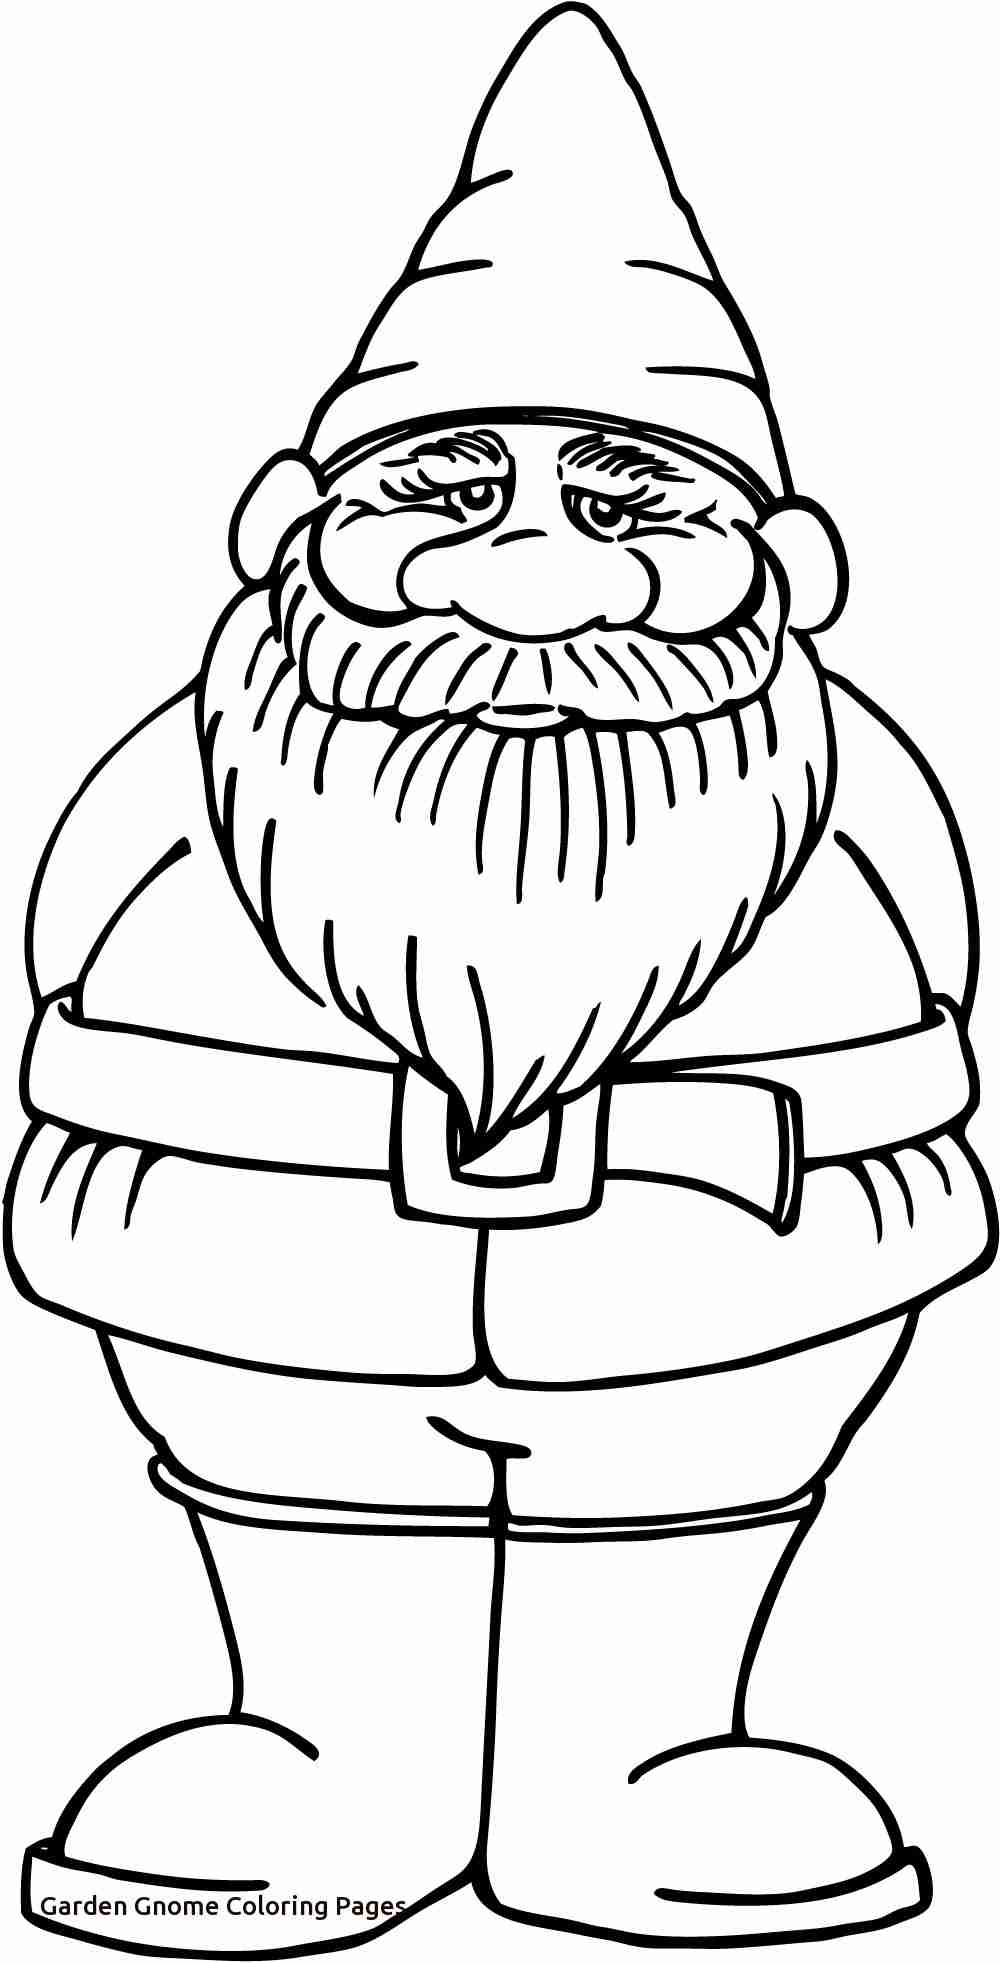 Garden Gnome Coloring Pages At Free Printable